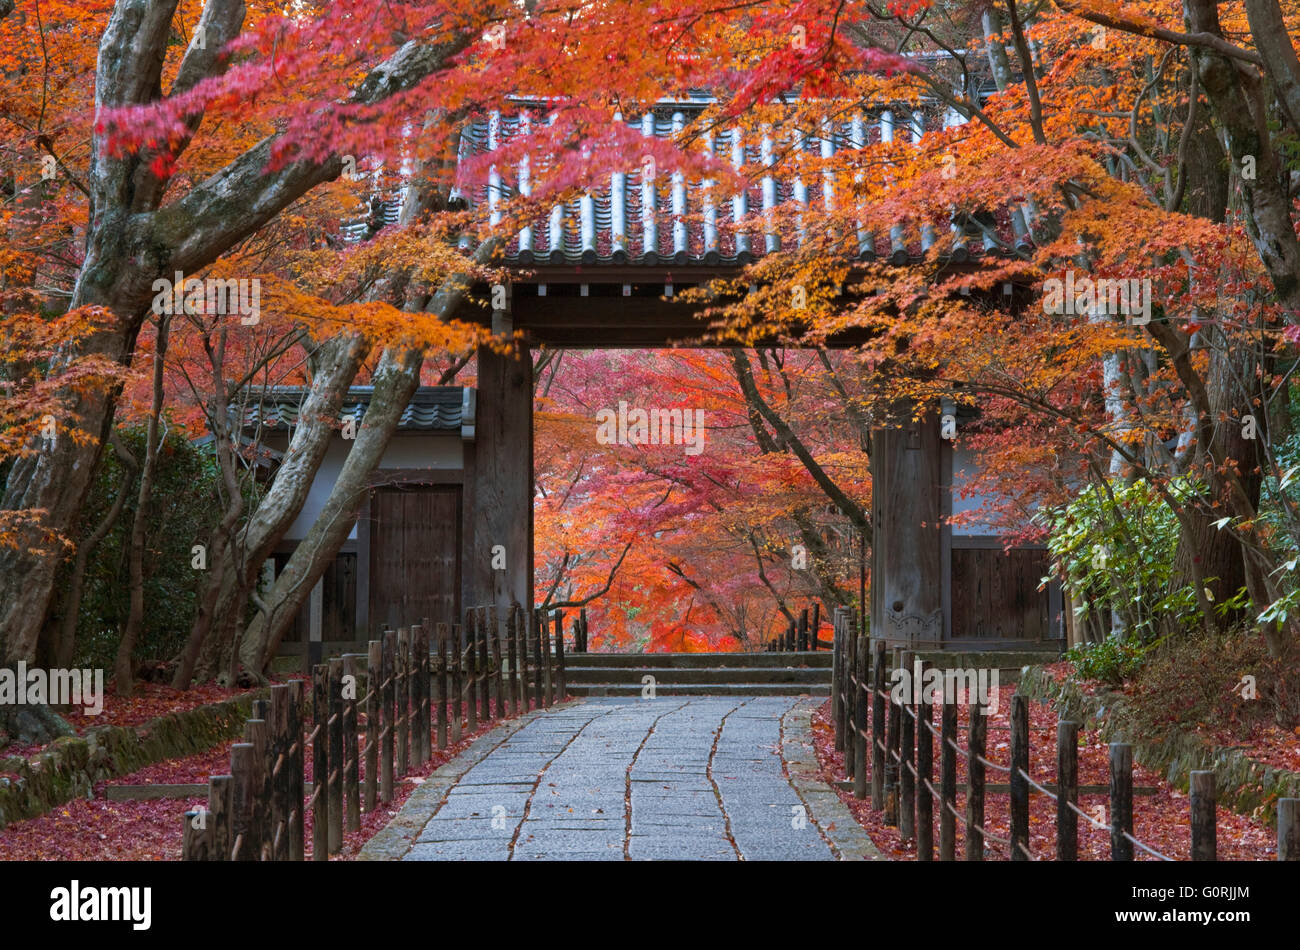 A telephoto view shows a traditional wooden gate roofed with kawara ceramic tiles amidst autumn foliage at Komyo-ji, a Buddhist temple in the southwest outskirts of Kyoto, Japan. Stock Photo